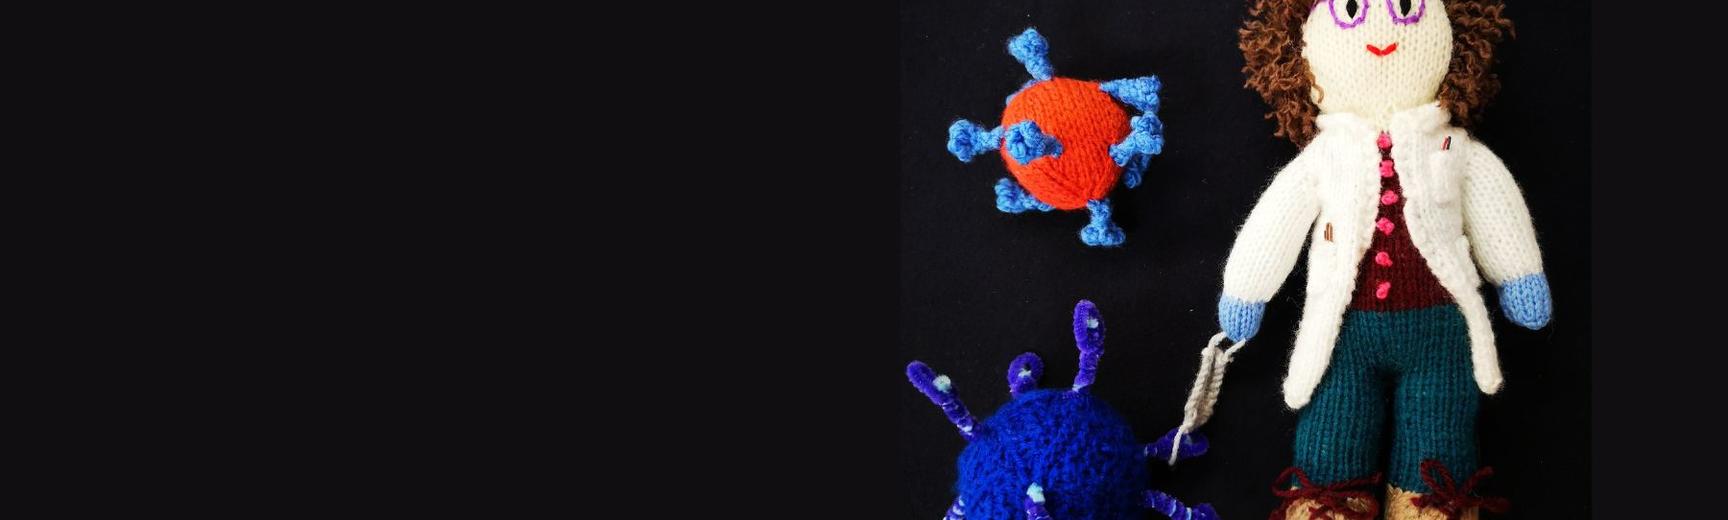 knitted dolls and viruses